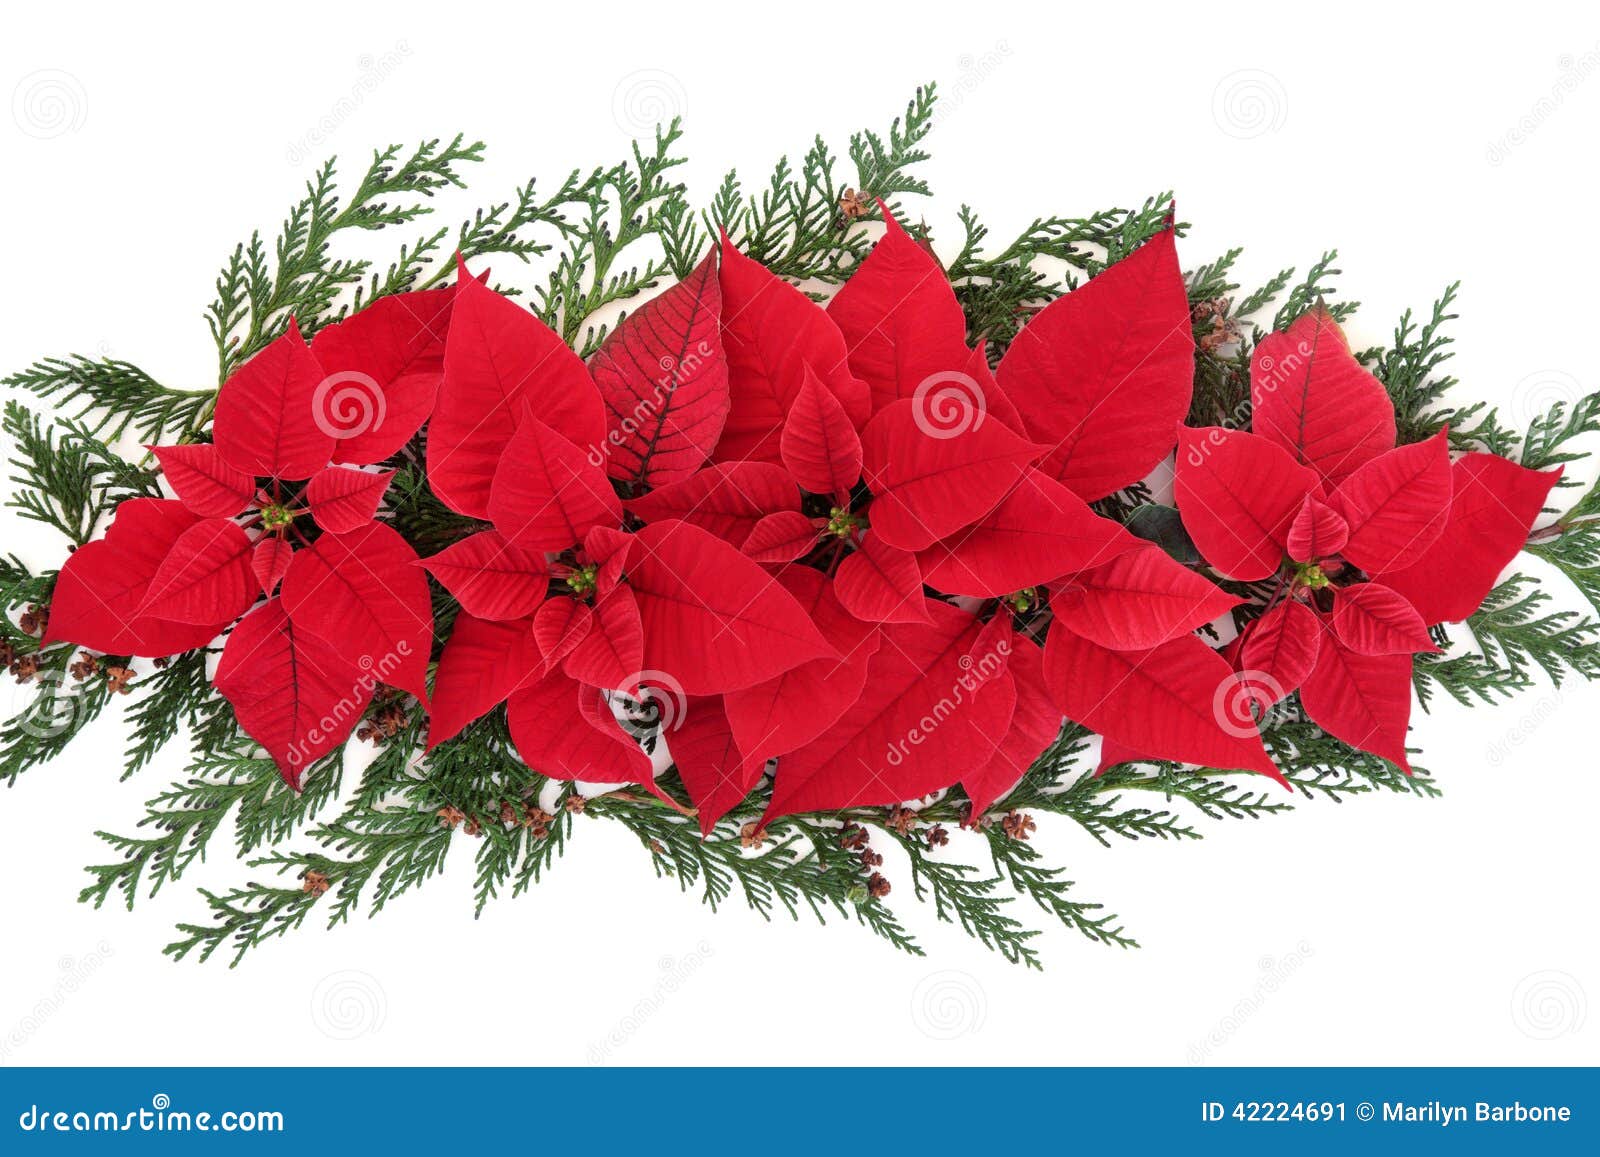 Poinsettia Flower Display stock image. Image of plant - 42224691